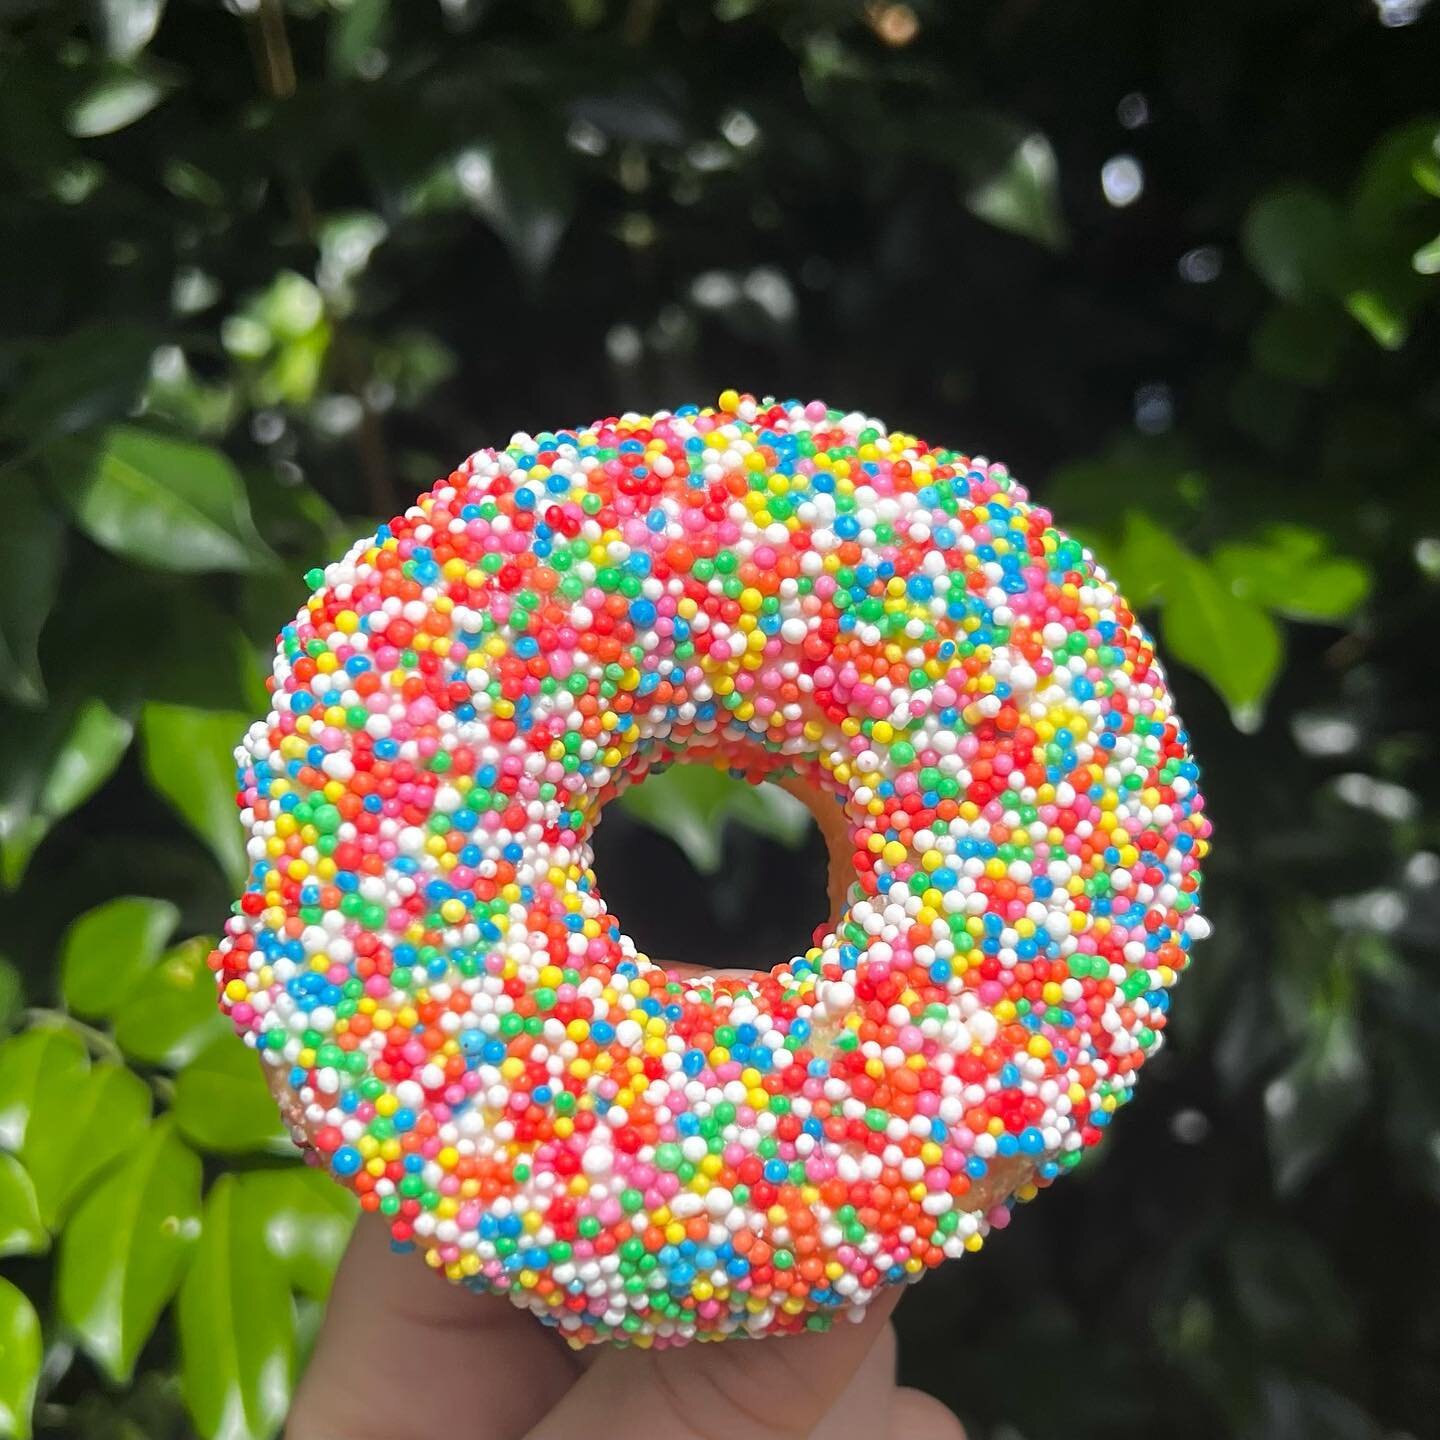 Grab a cheeky sprinkle donut to brighten up your day! ☔️🌈😁🍩